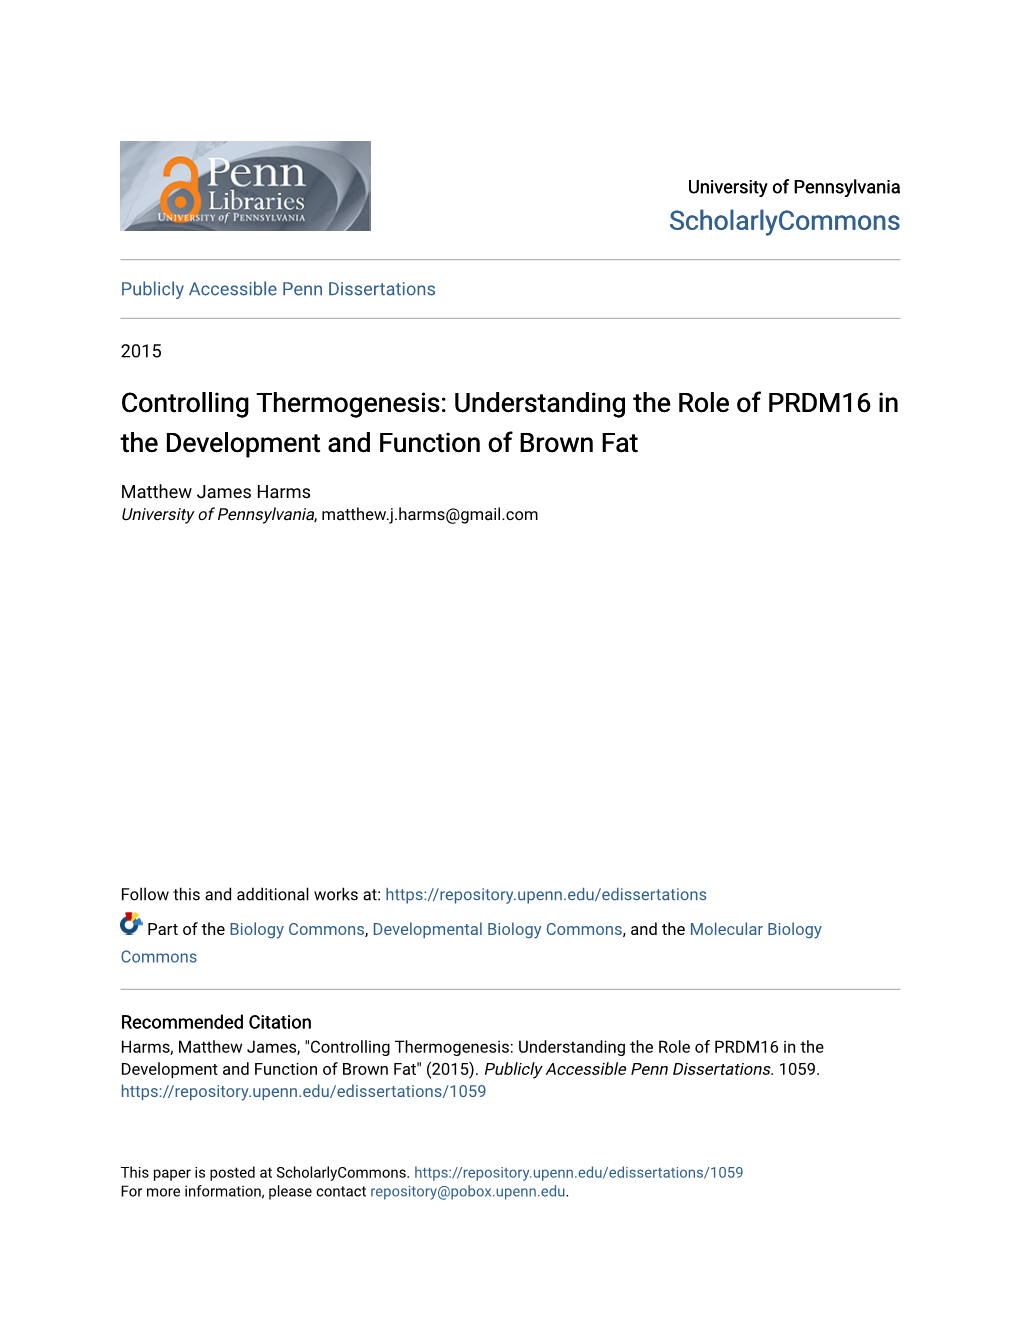 Understanding the Role of PRDM16 in the Development and Function of Brown Fat